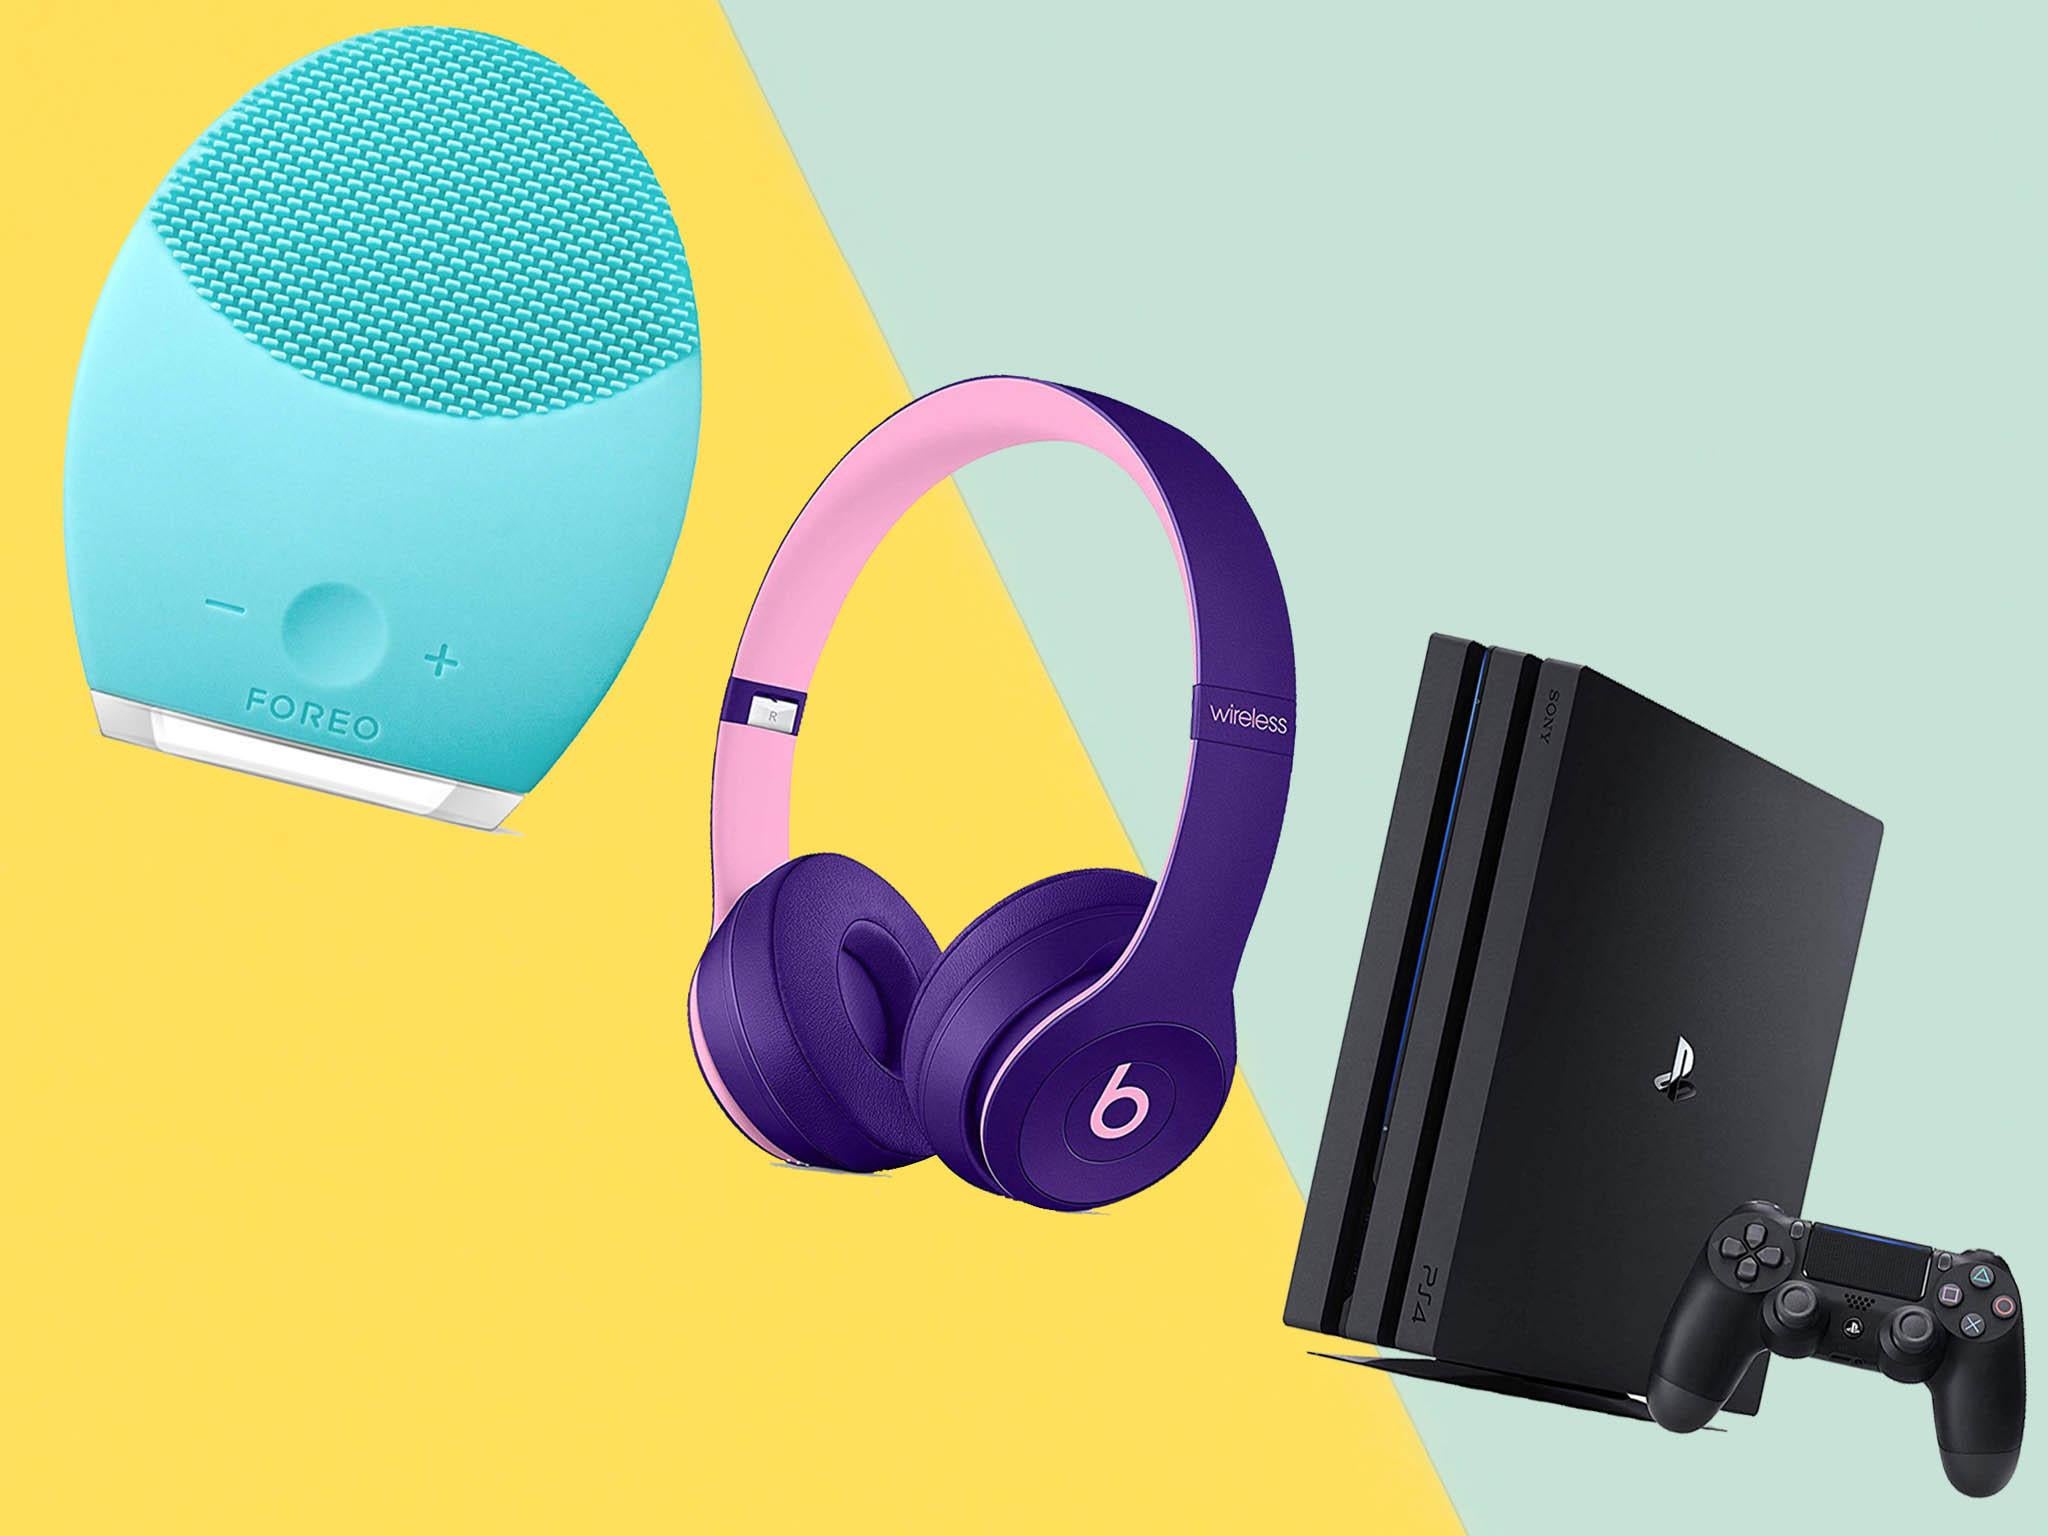 Best Black Friday 2019 deals: How to get the best discounts in the sales this year